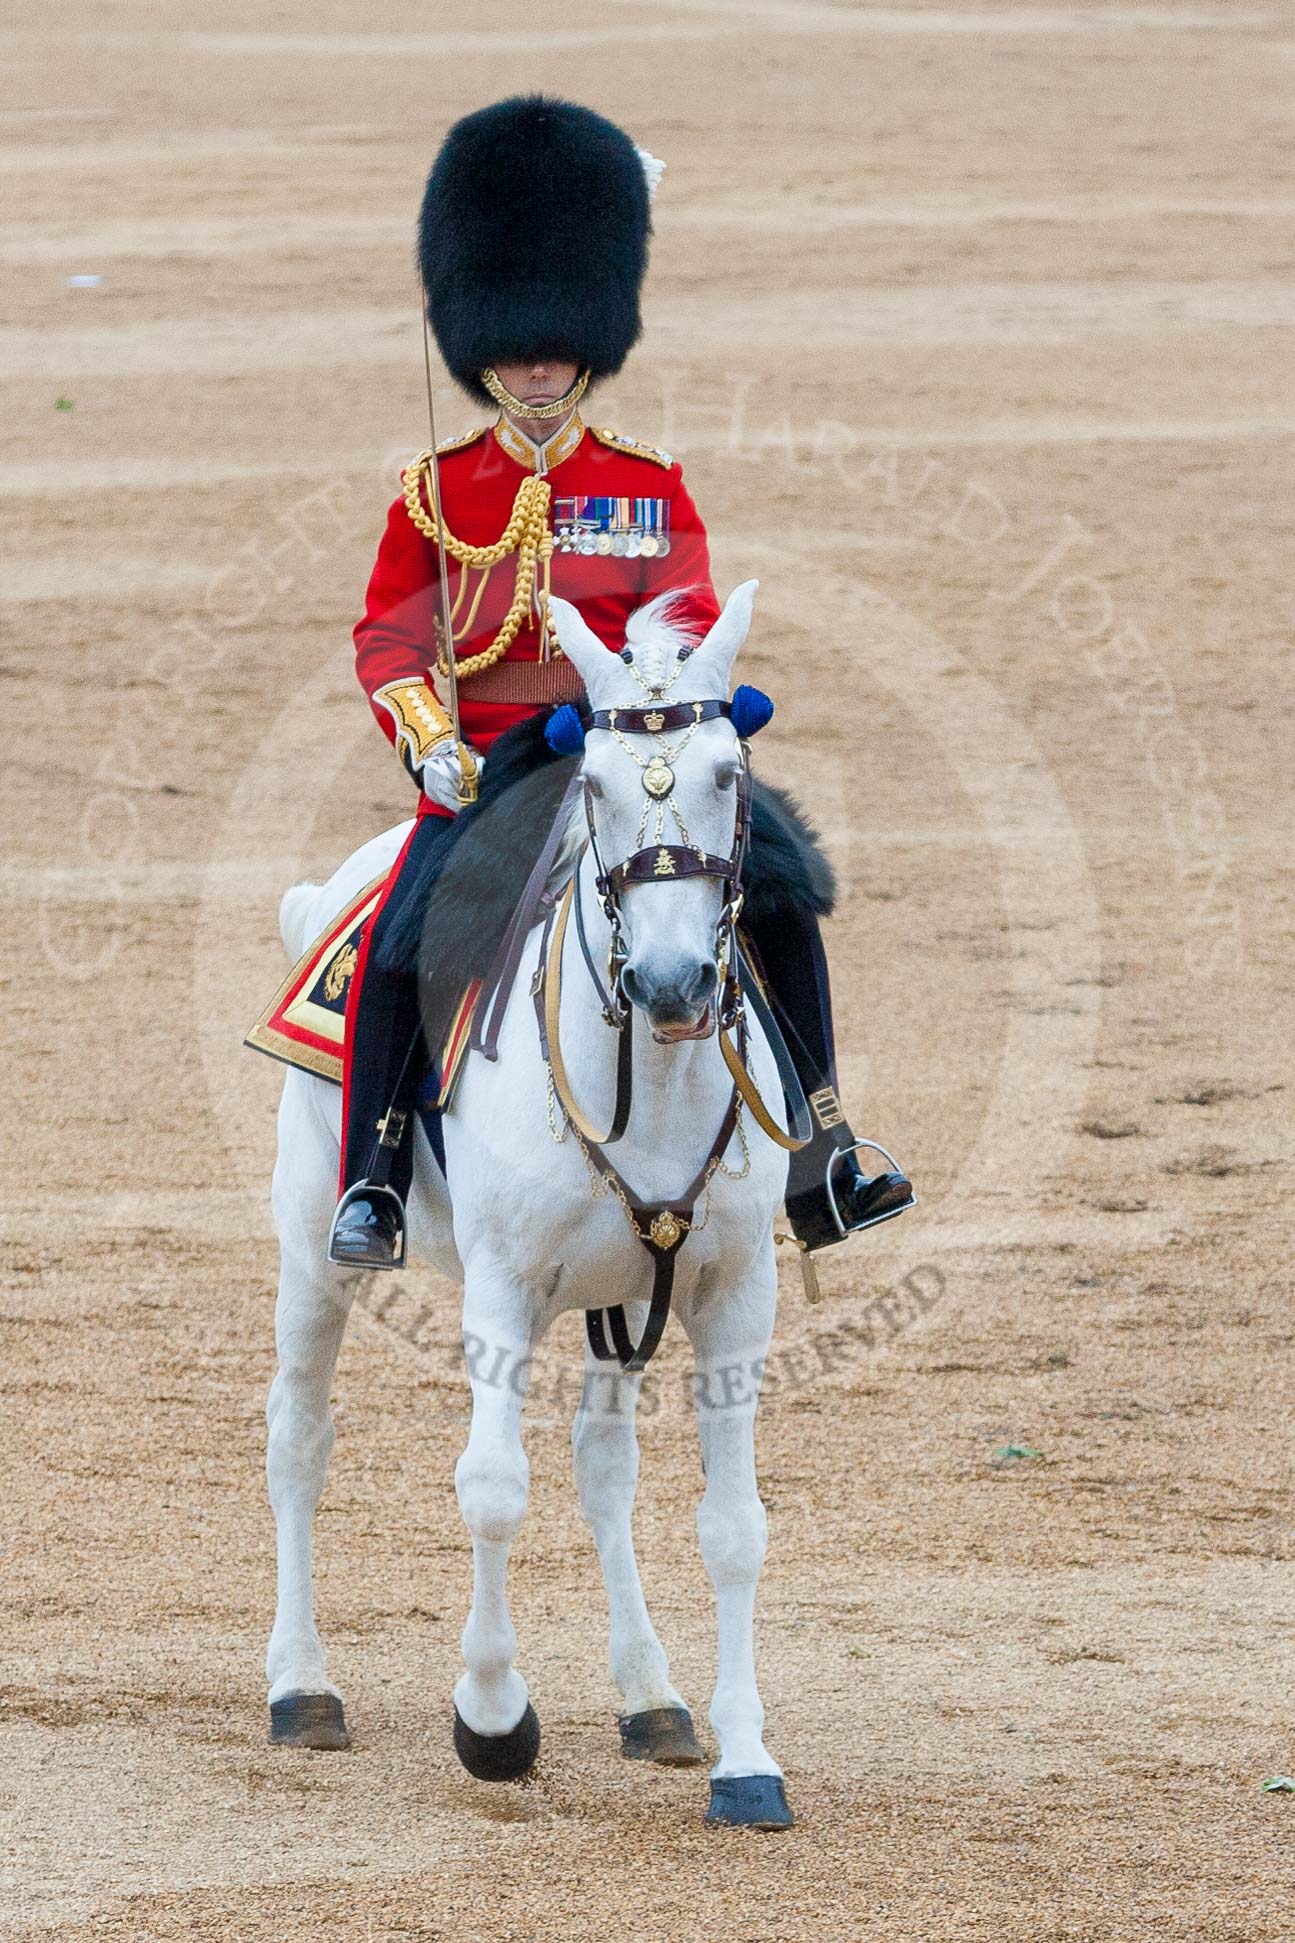 Trooping the Colour 2015. Image #644, 13 June 2015 12:06 Horse Guards Parade, London, UK